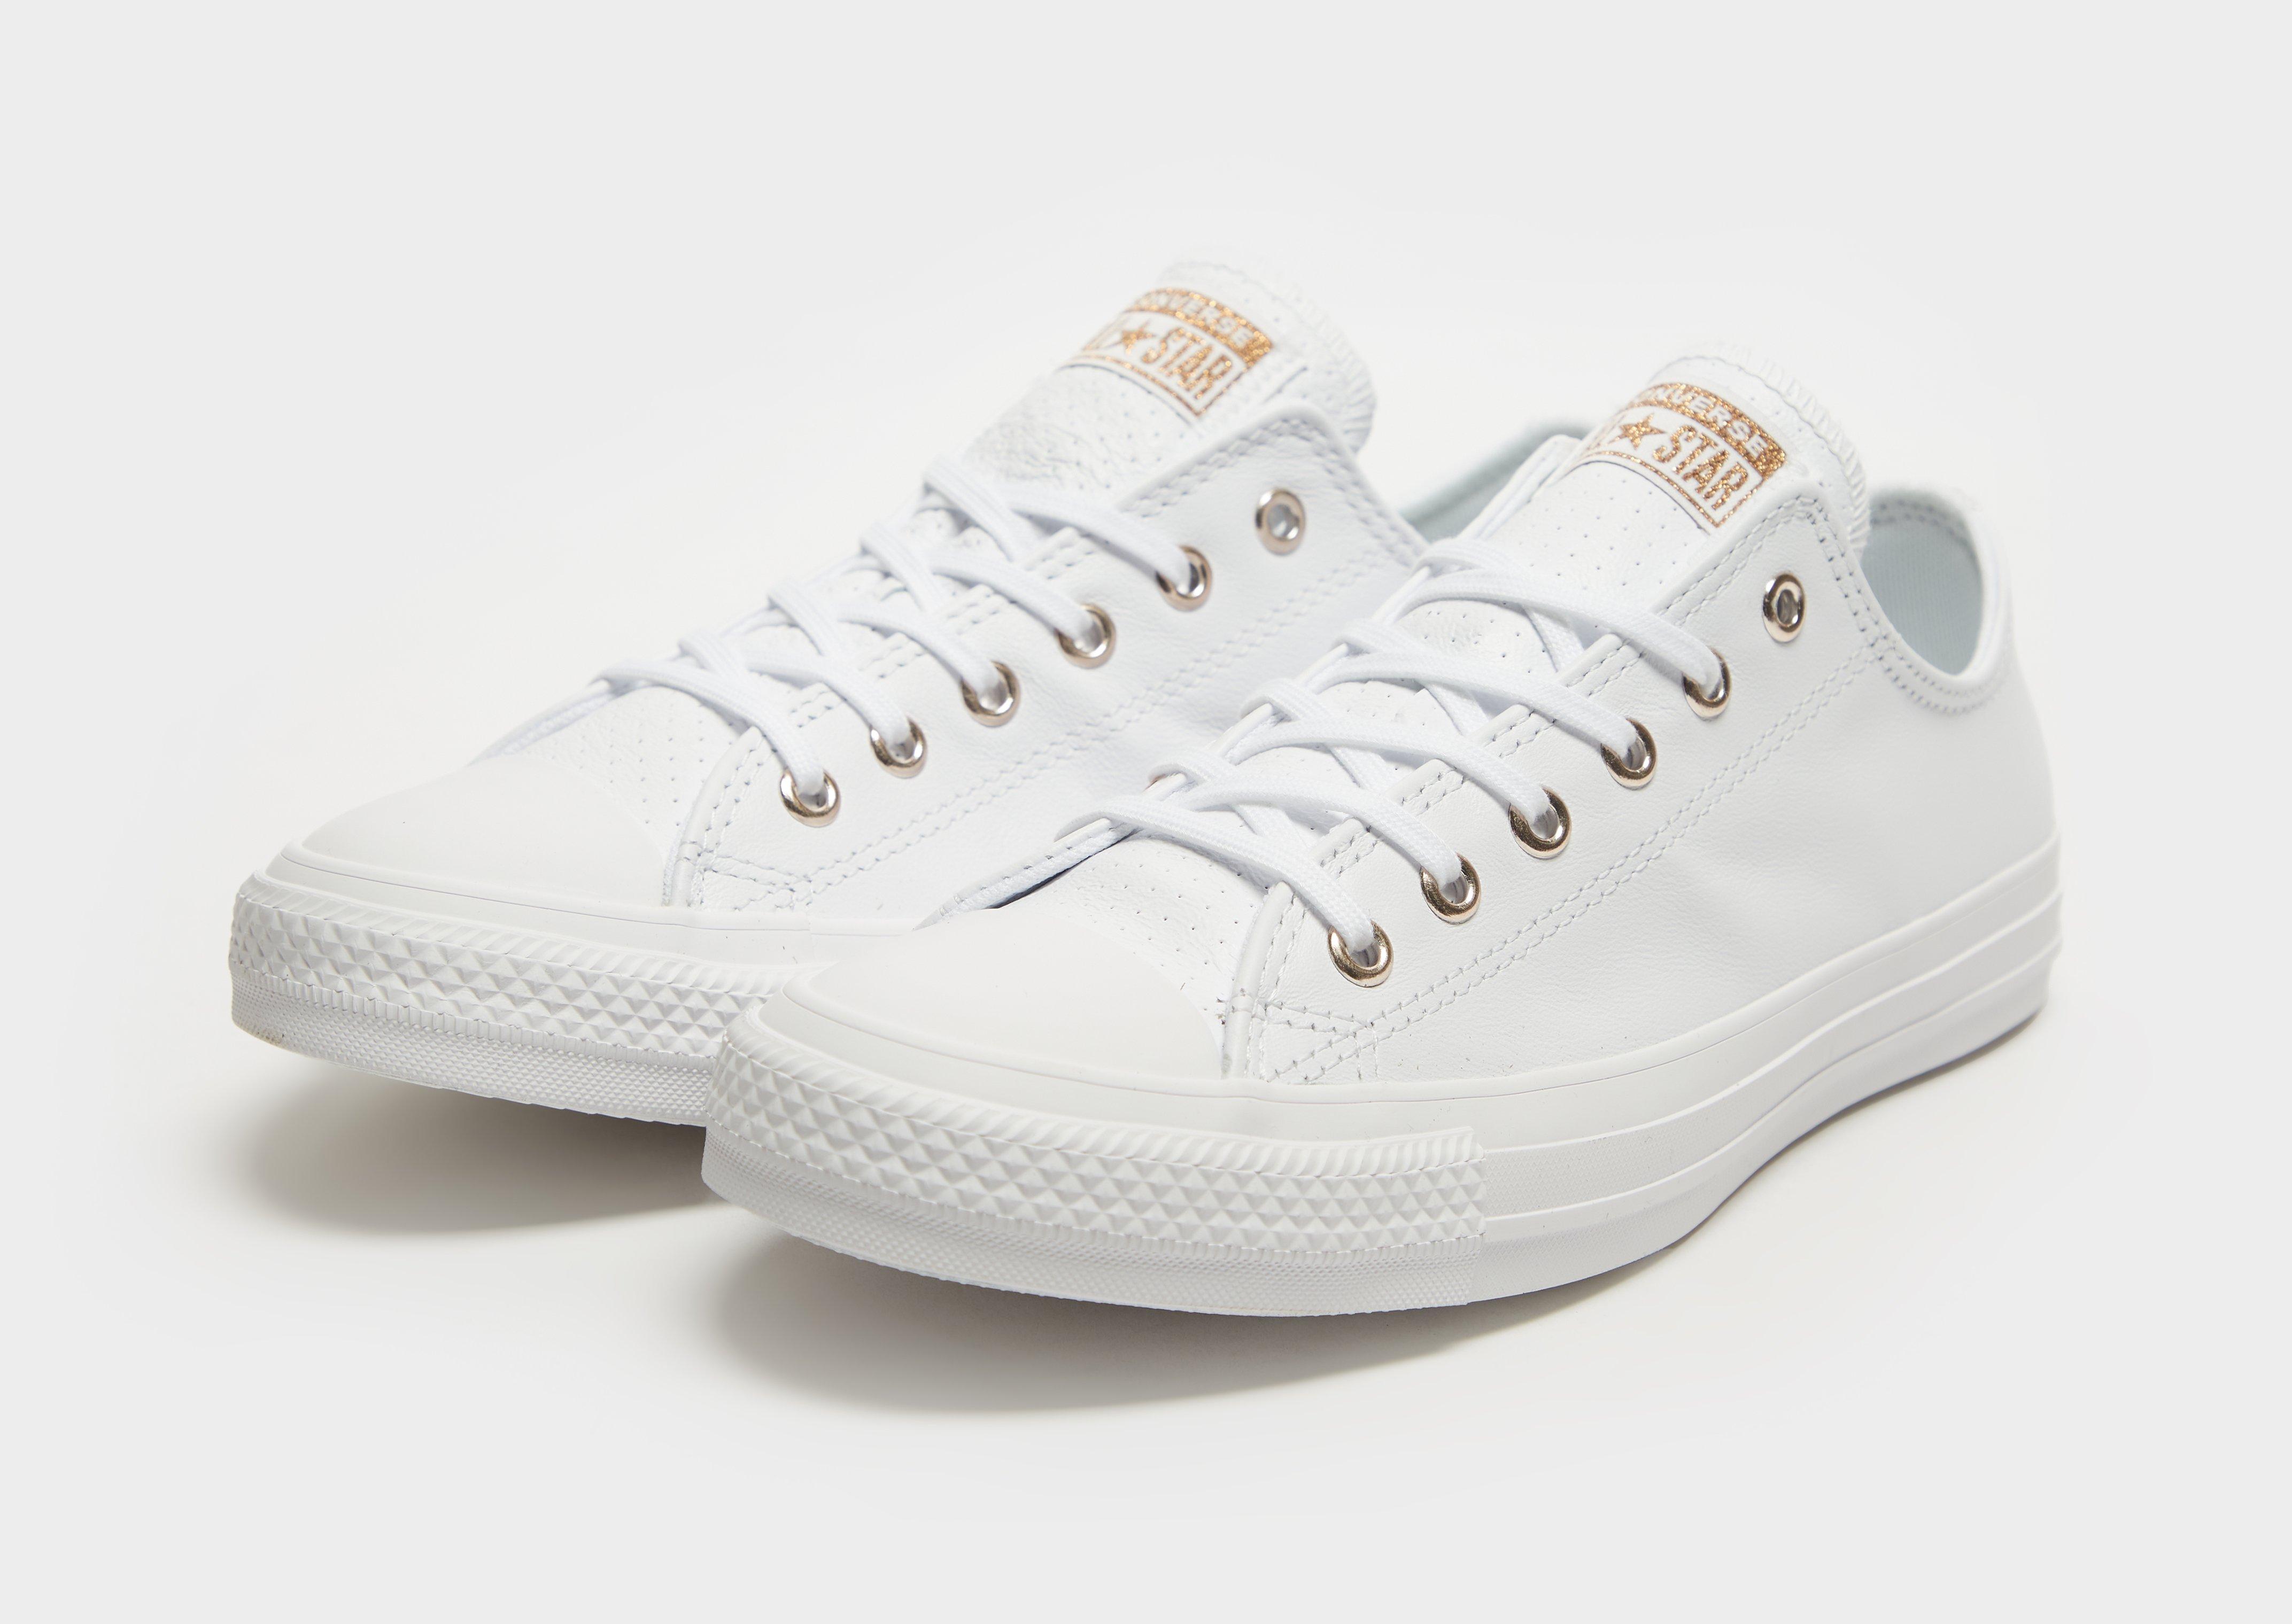 Sociale Studier assistent Thanksgiving White Converse All Star Oxford Junior | JD Sports Global - JD Sports Global